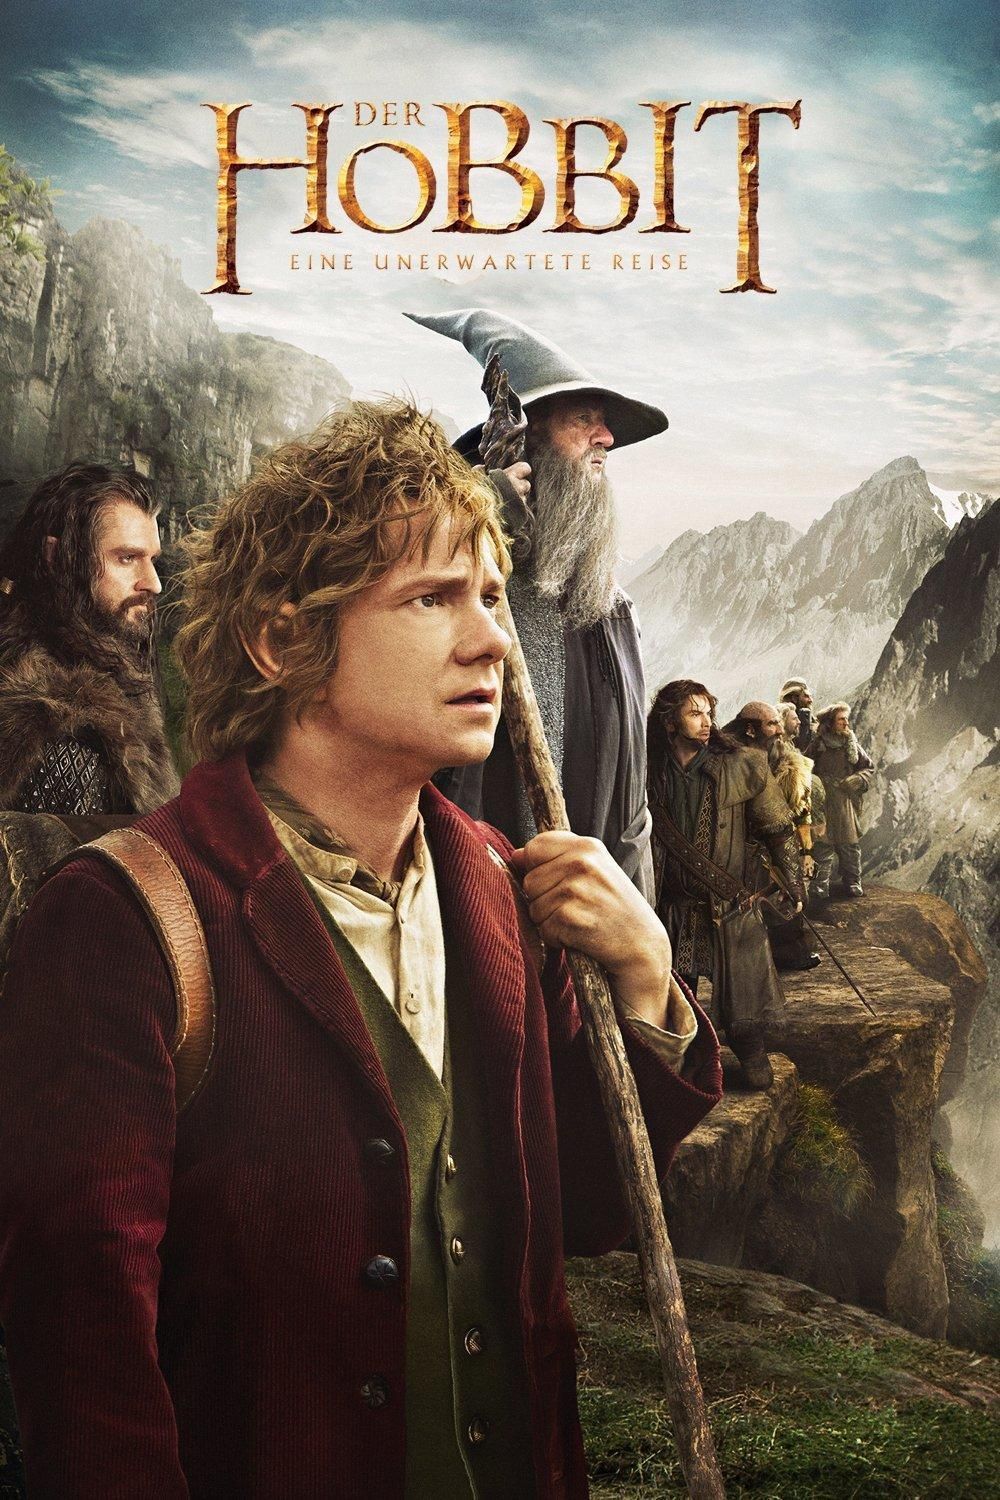 The Hobbit: An Unexpected Journey (2012) Movie Information